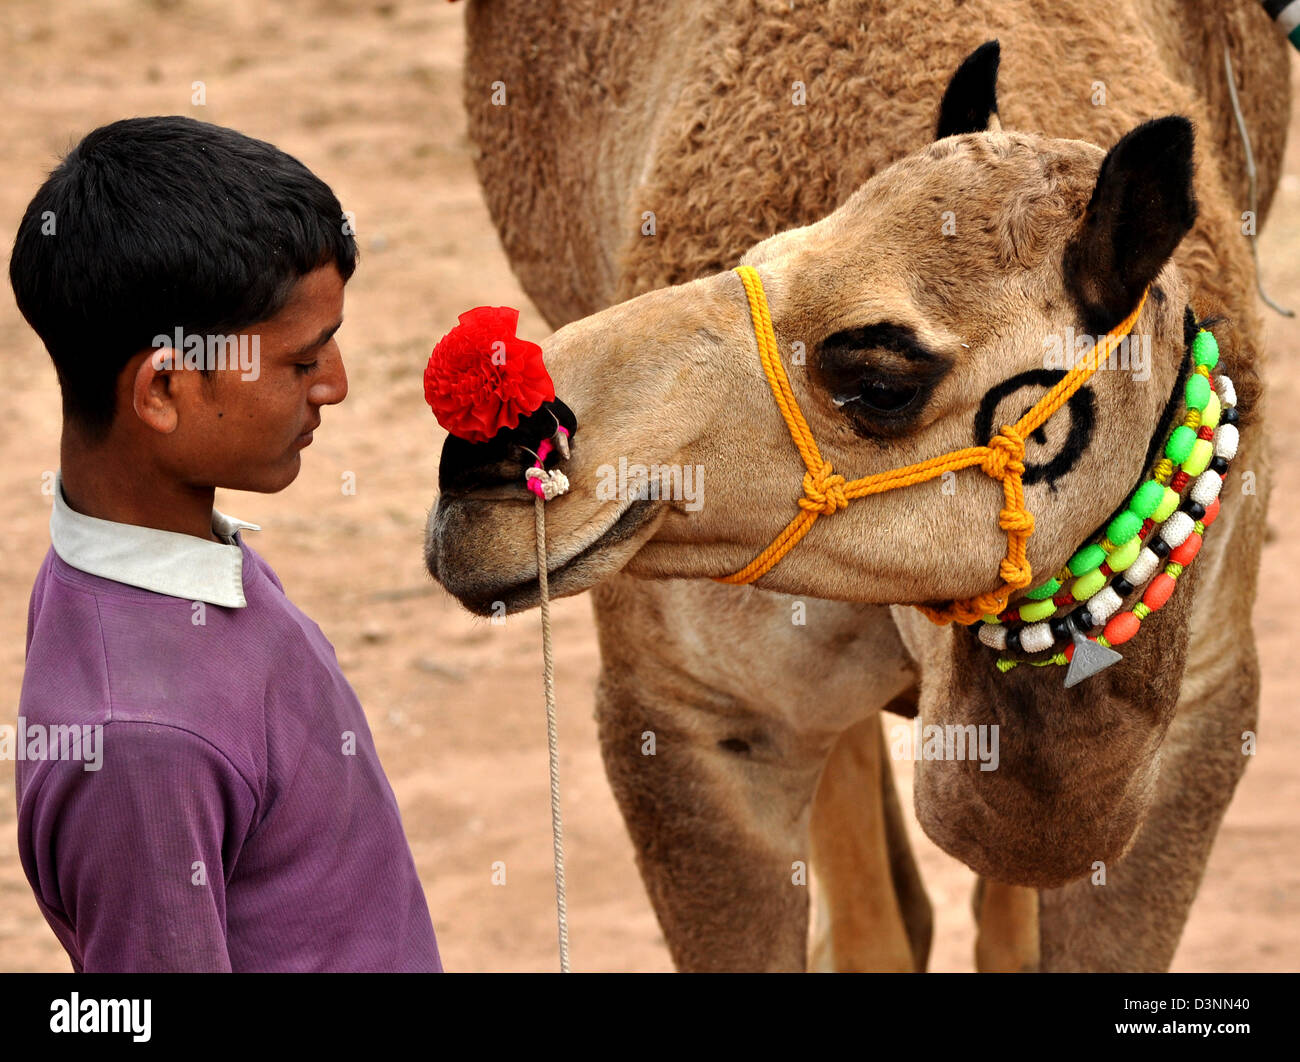 An owner admires his camel at a cattle fair in Nagaur town of India's Rajasthan state. Stock Photo